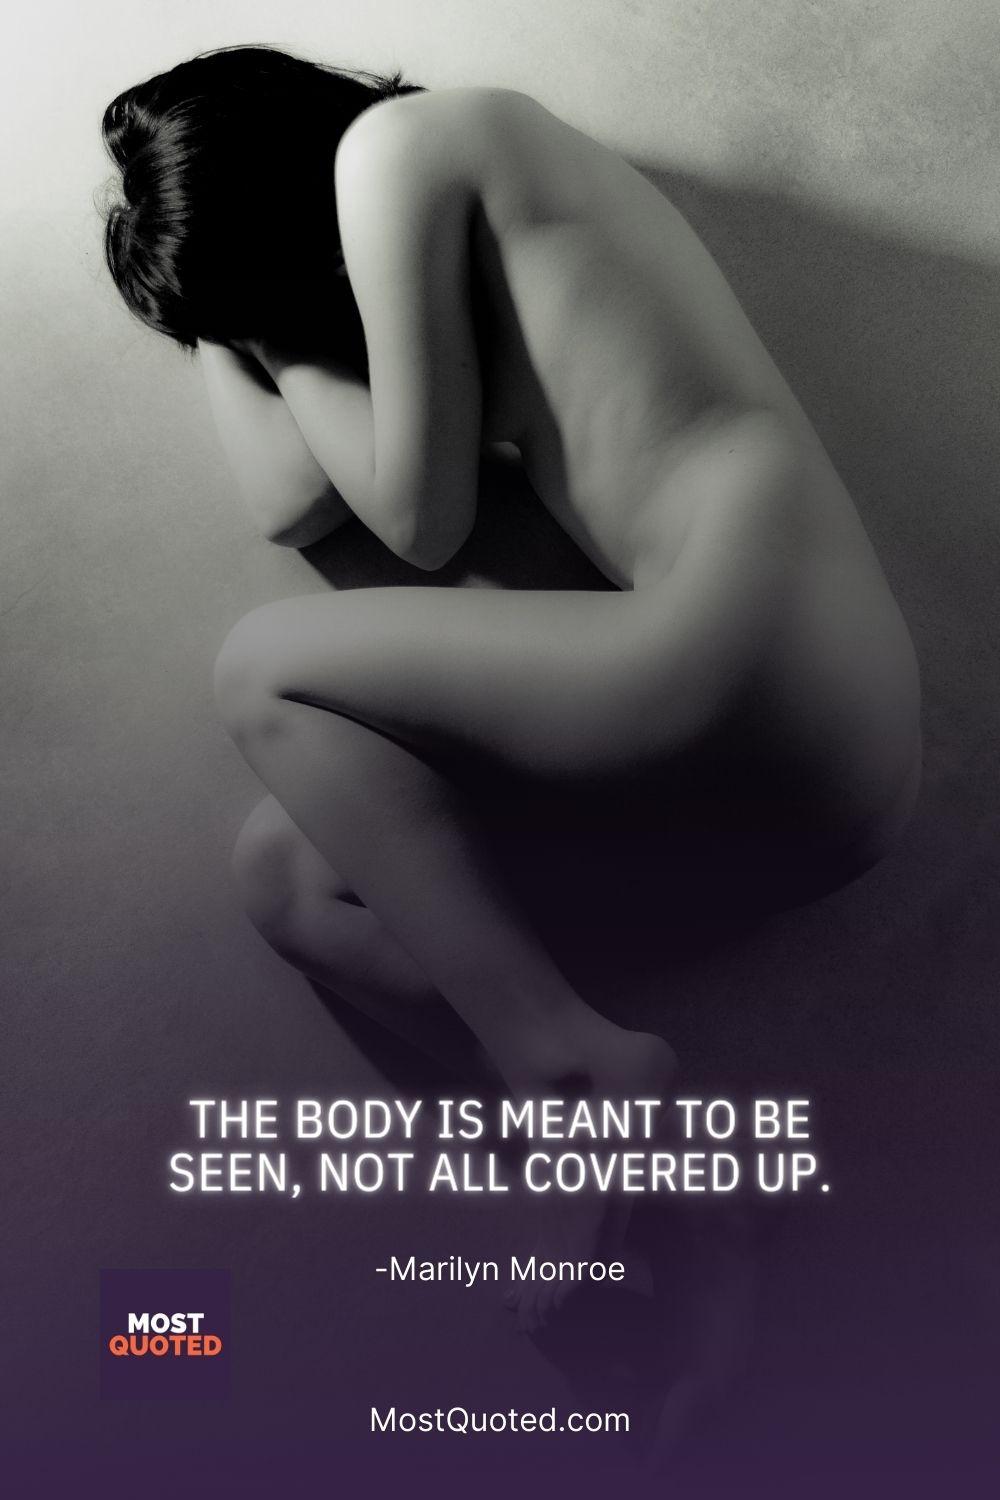 The body is meant to be seen, not all covered up. - Marilyn Monroe